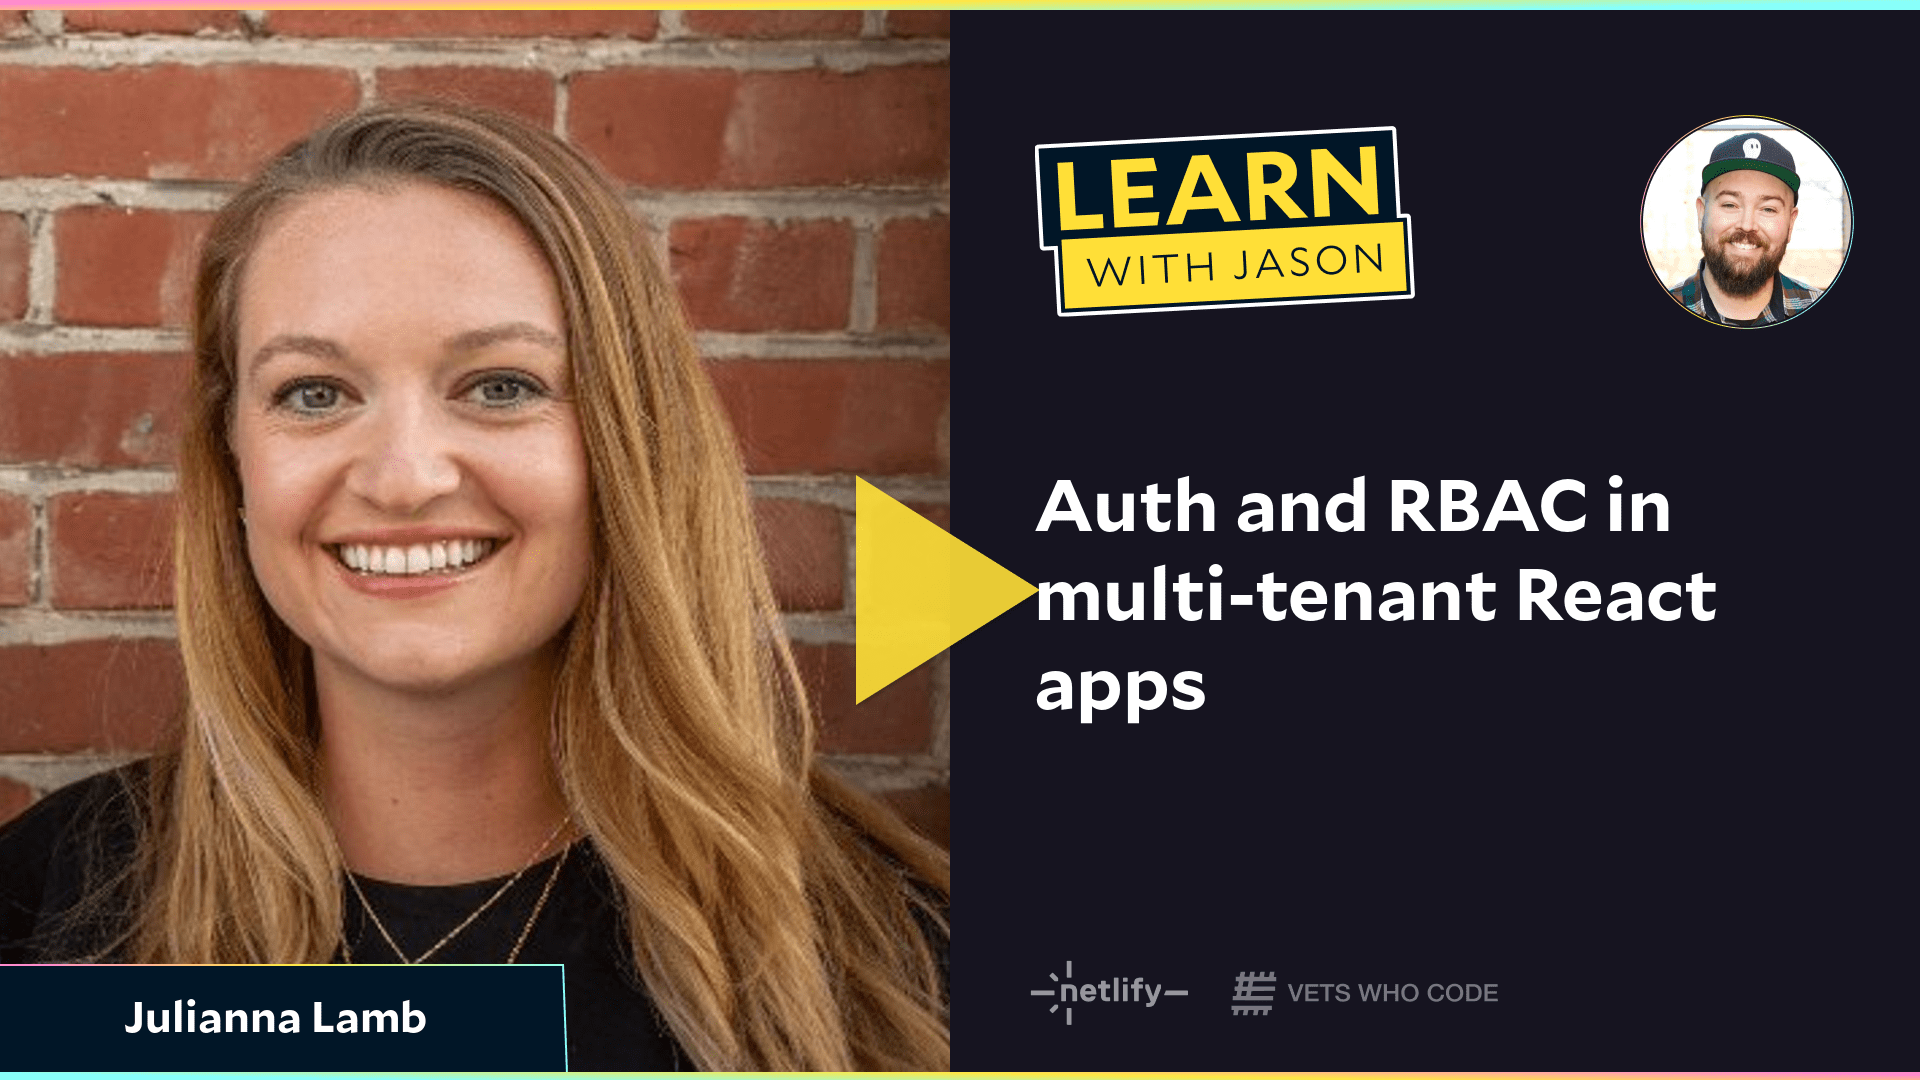 Auth and RBAC in multi-tenant React apps (with Julianna Lamb)